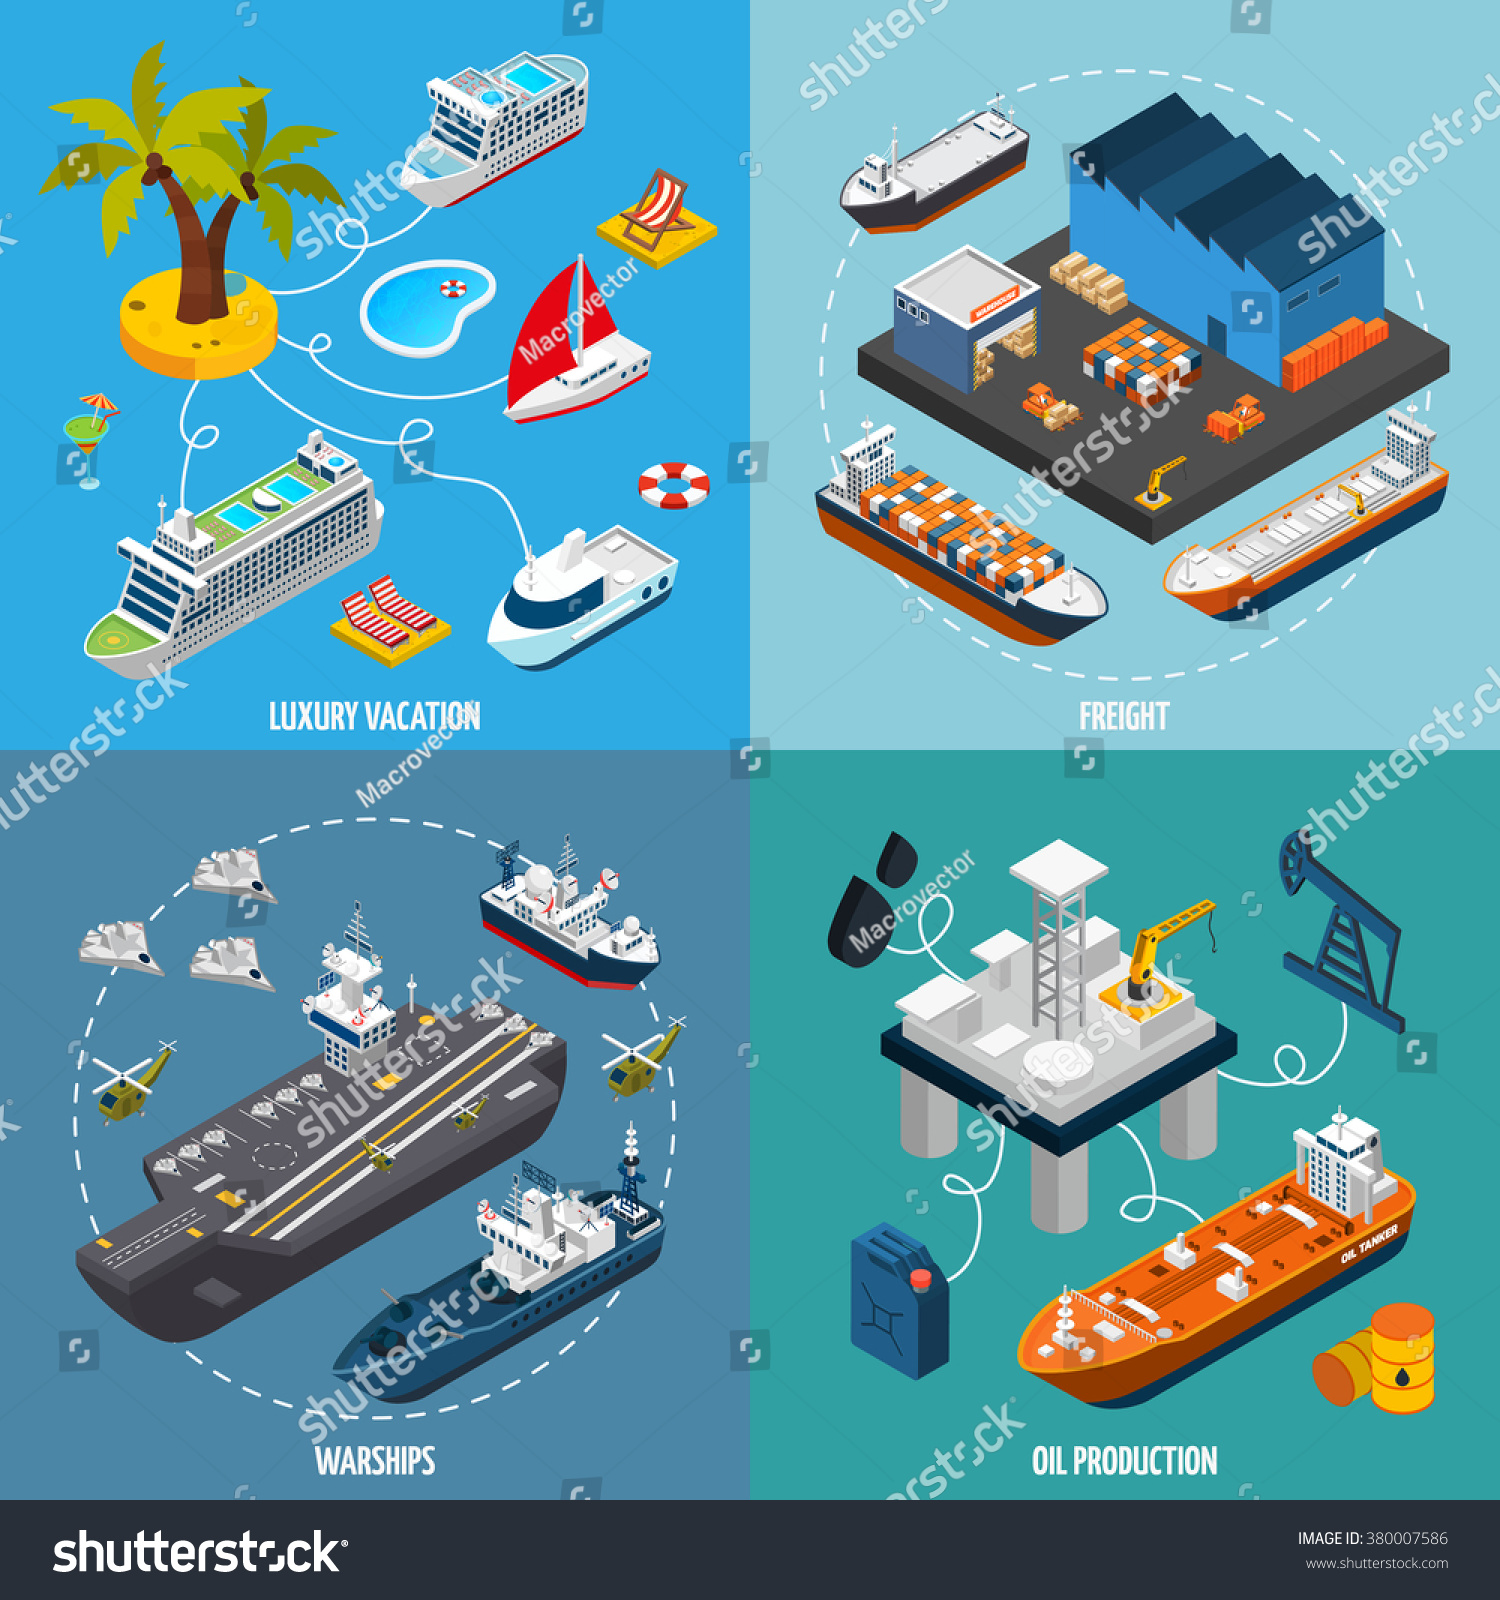 SVG of Oil tanker and luxury vacation passenger liner vessels 4 isometric icons square composition poster abstract isolated vector illustration svg